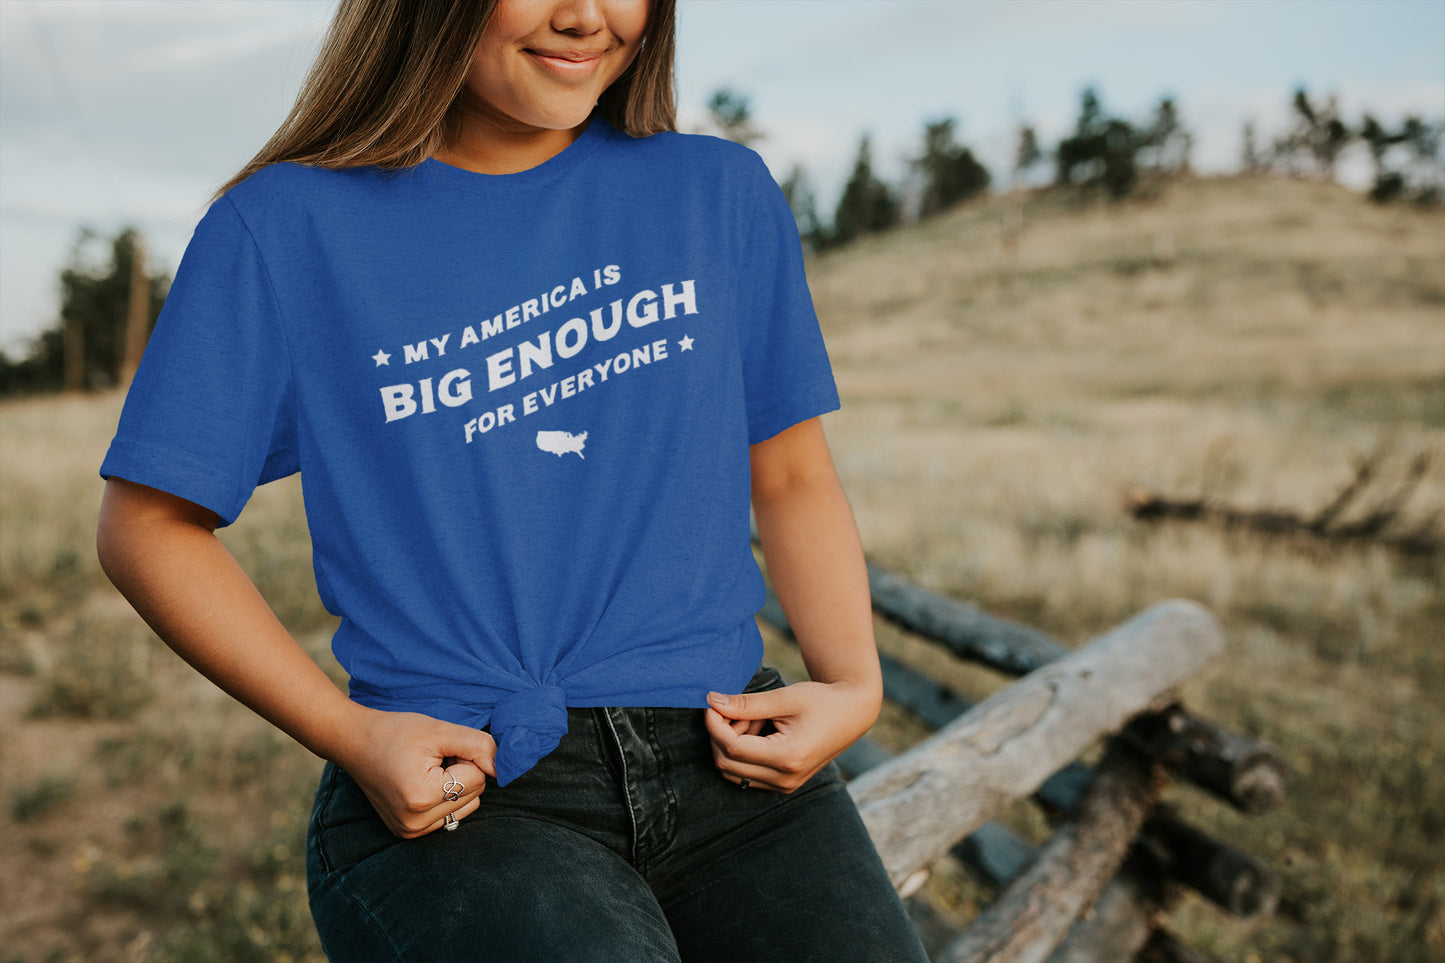 My America is Big Enough for Everyone - Men’s/Unisex Tee